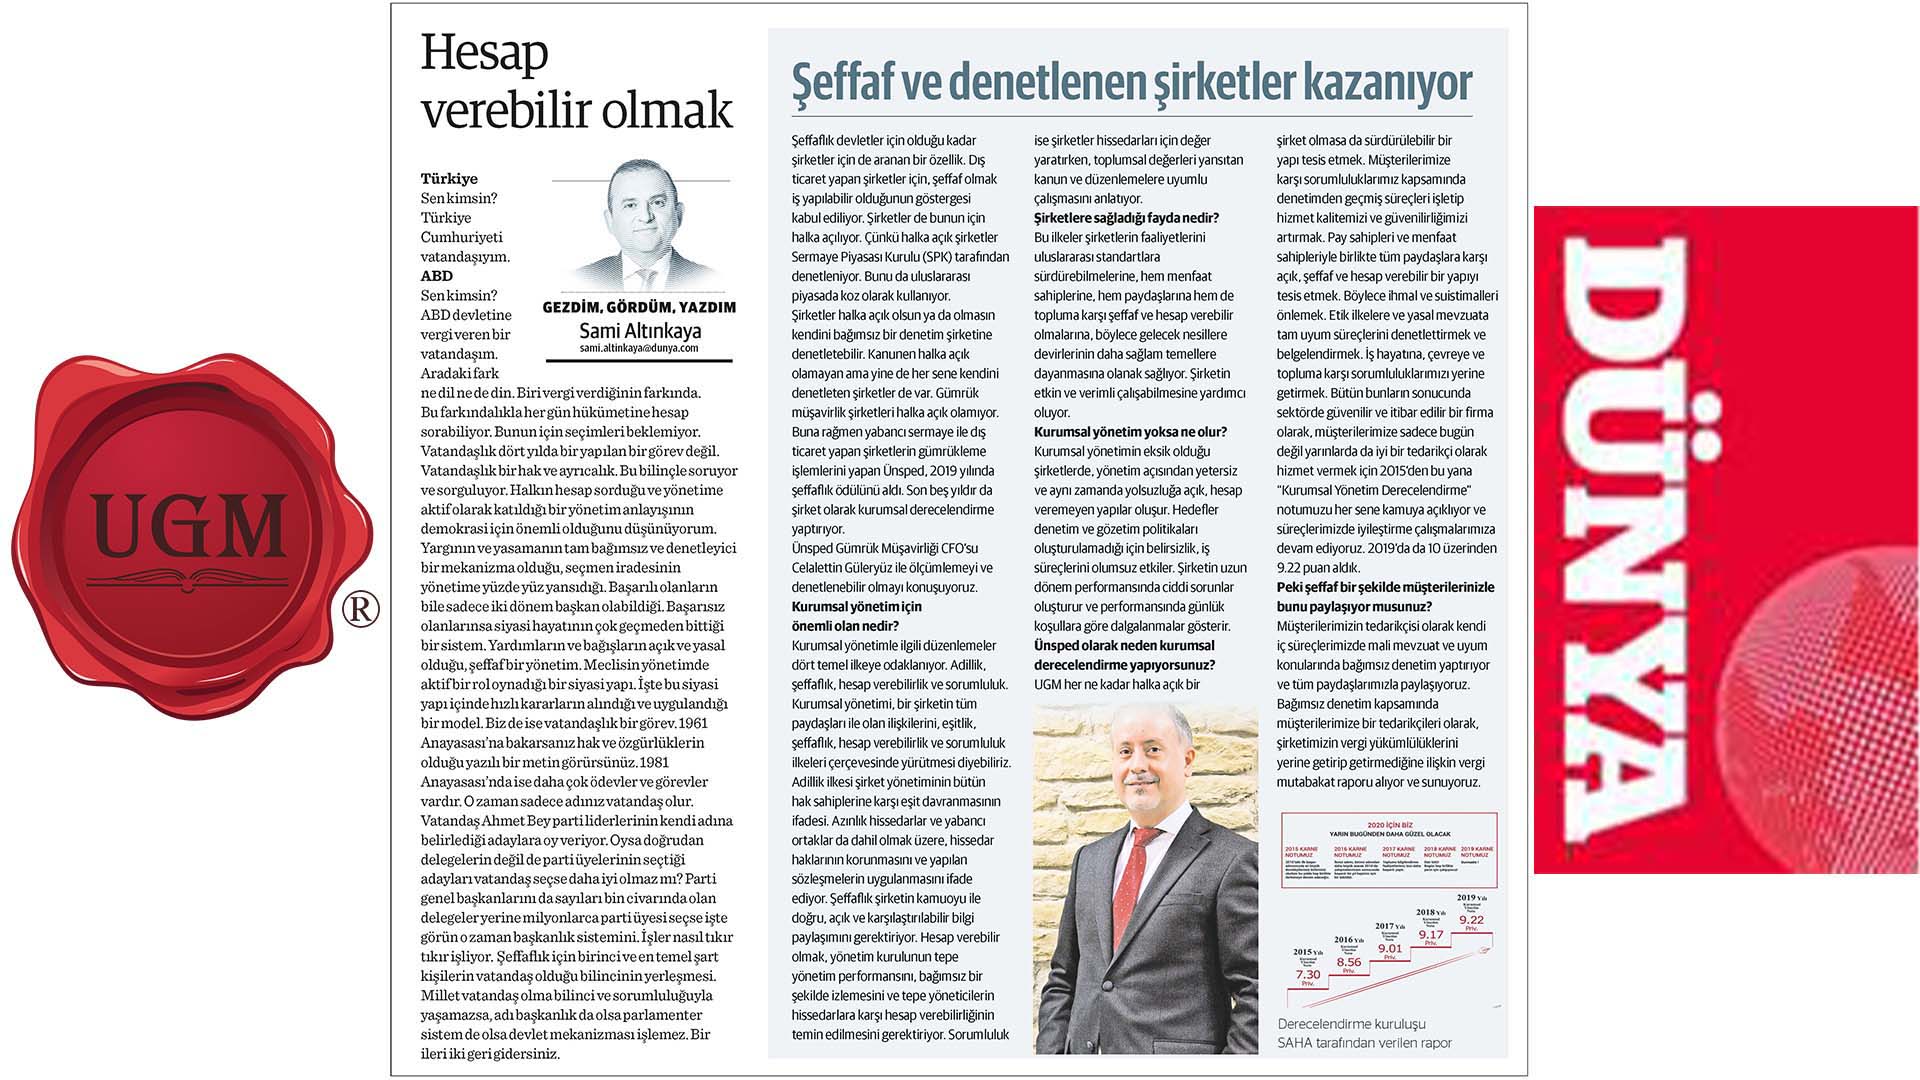 Article of Sami Altınkaya, UGM Corporate Communications Director, titled "Being Accountable" was published in Dünya Newspaper on 27.04.2020.